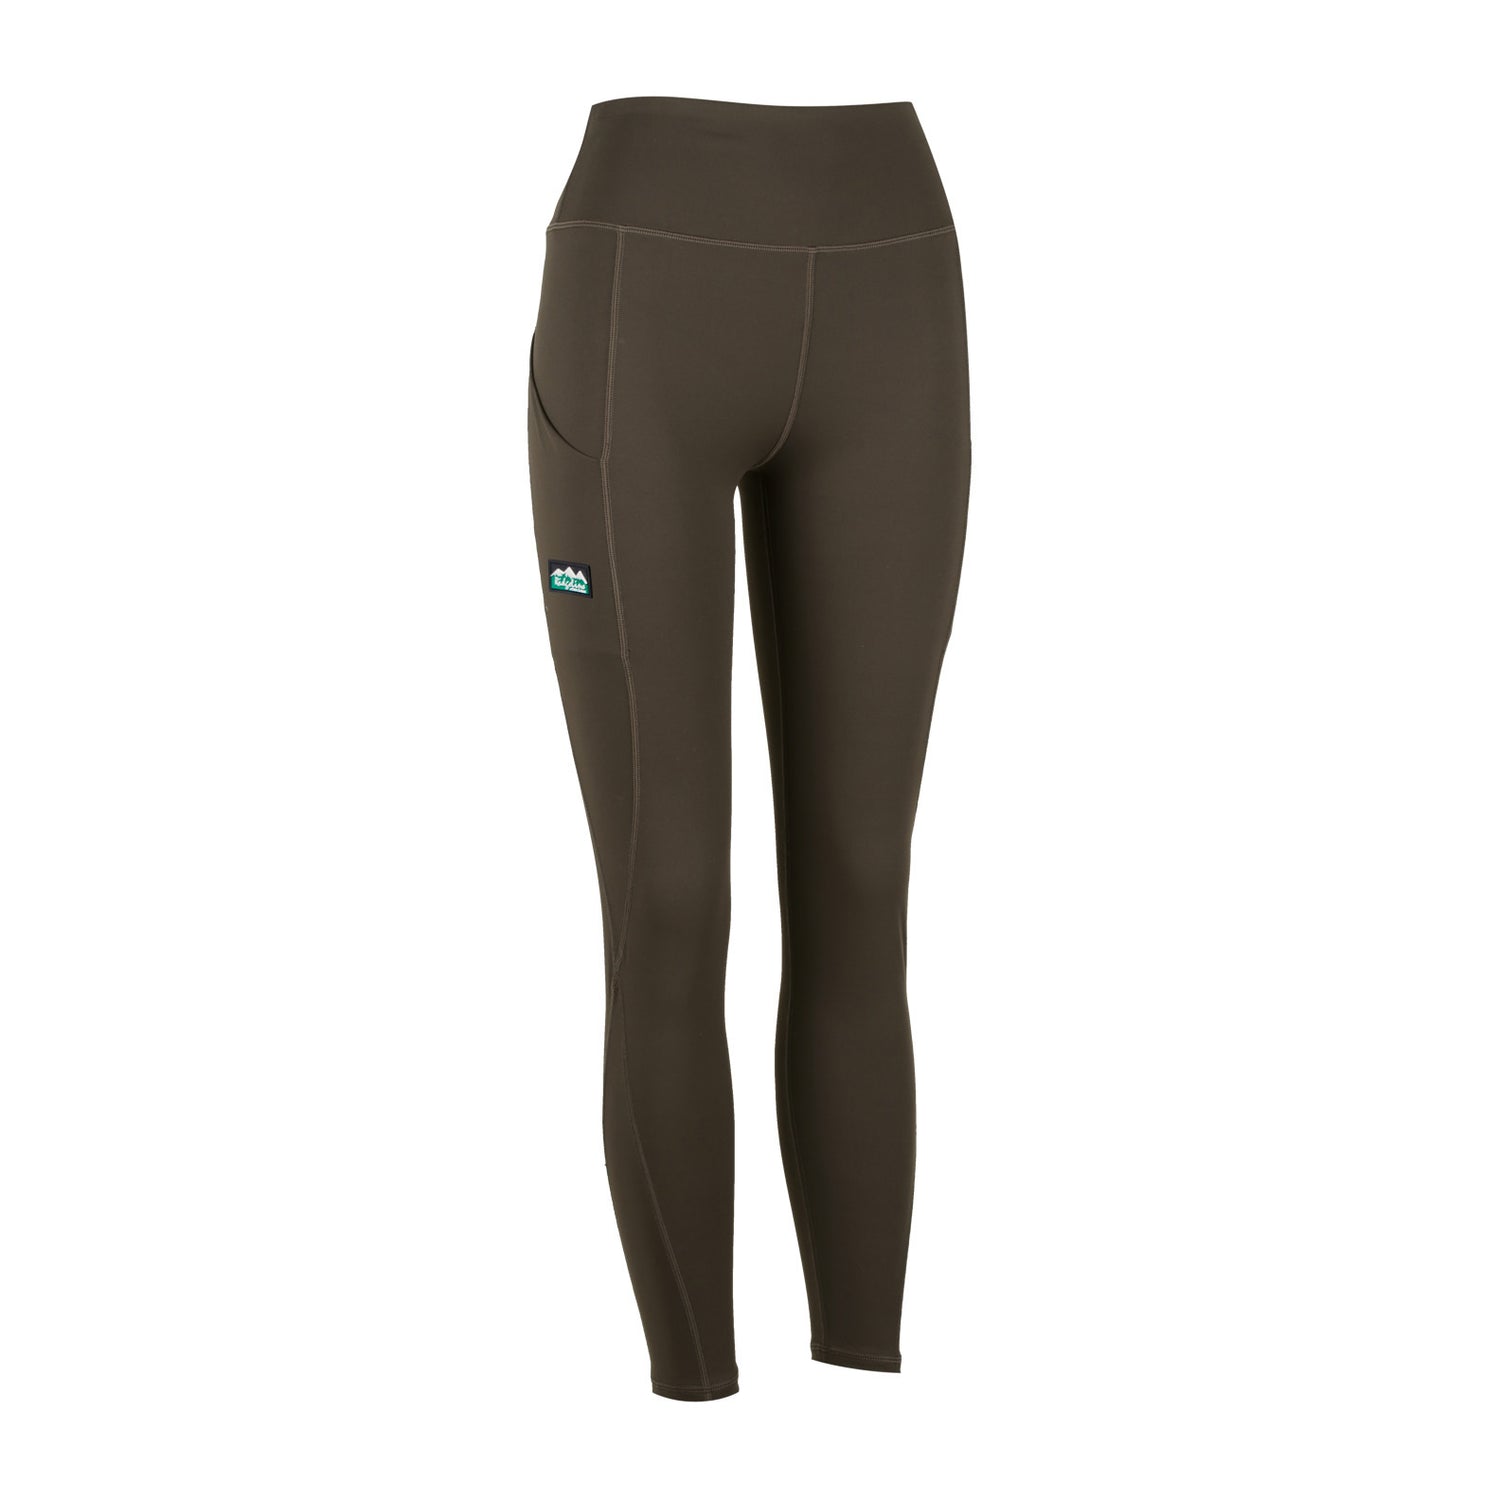 Patagonia Pack Out Hike Tights - Leggings Women's, Free EU Delivery